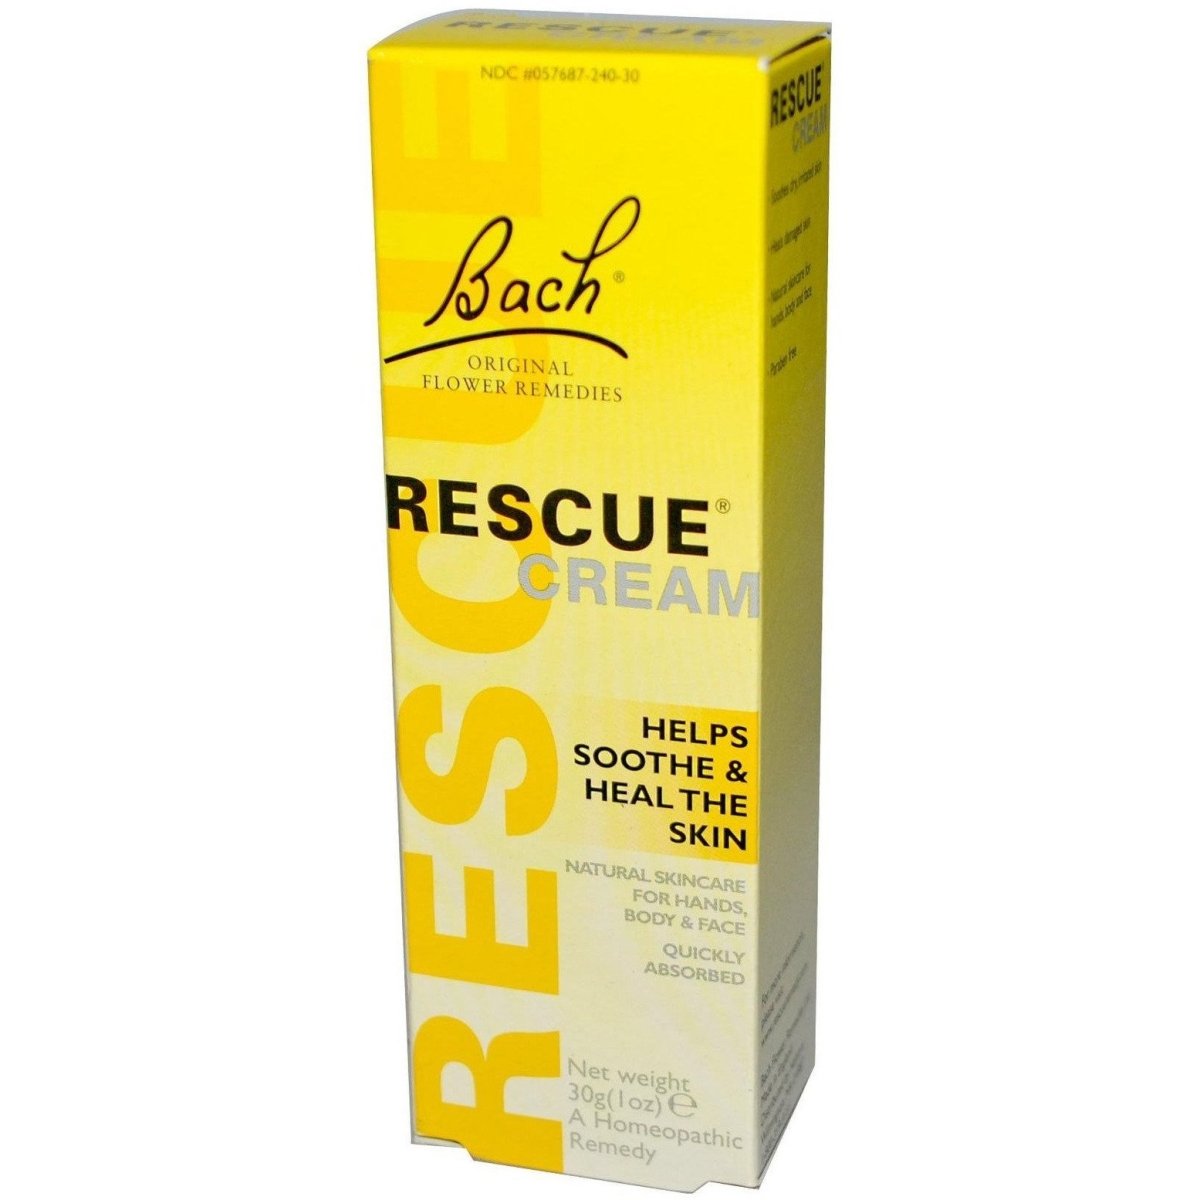 Rescue Cream - Helps Smooth &amp; Heal The Skin - 30g - 1oz